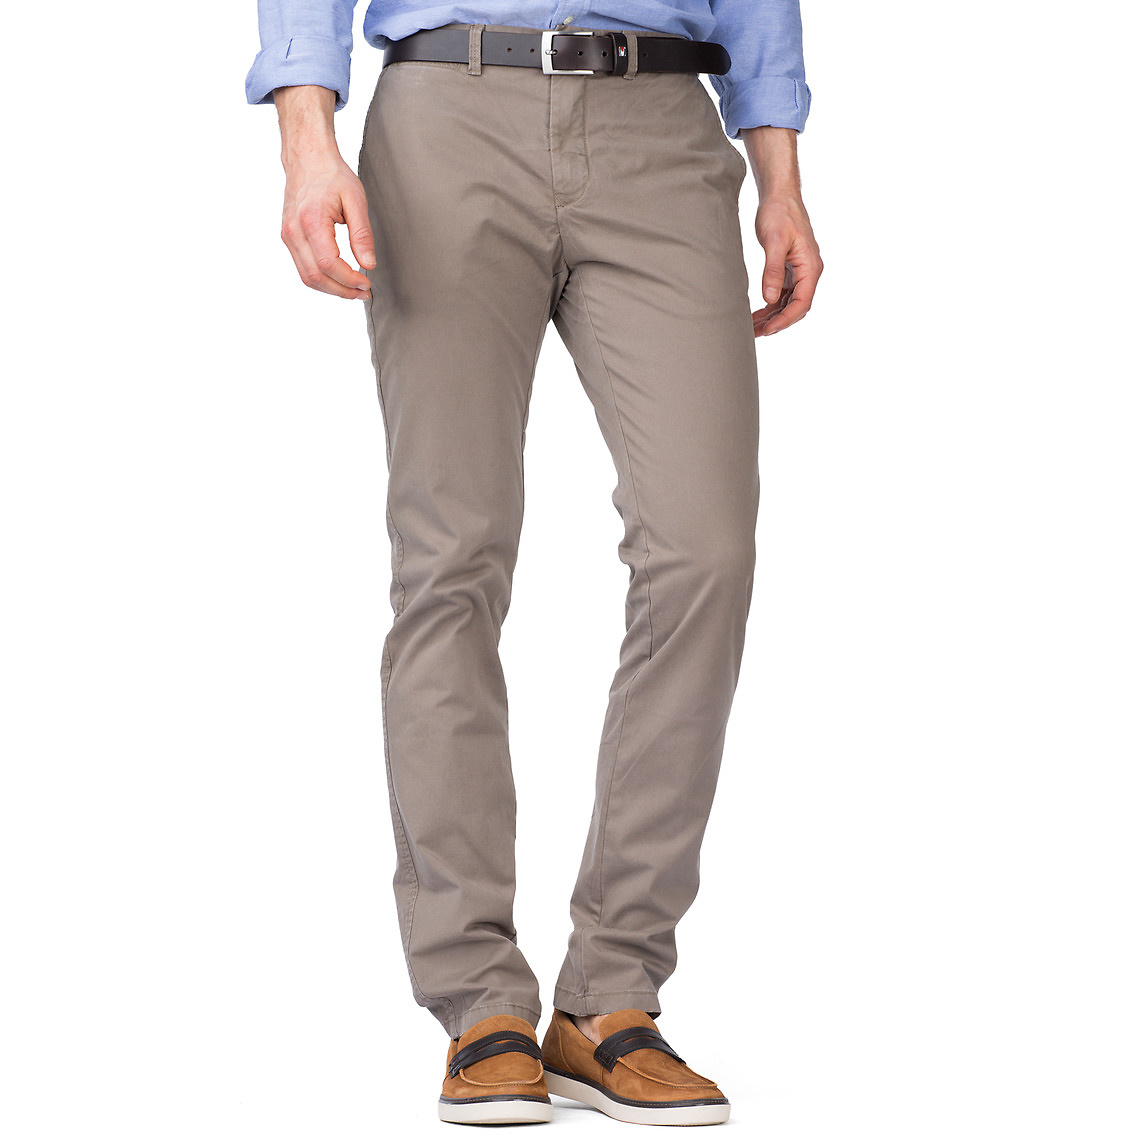 Repeler preocupación asesino Tommy Hilfiger Hudson Chino in Walnut (Brown) for Men - Lyst